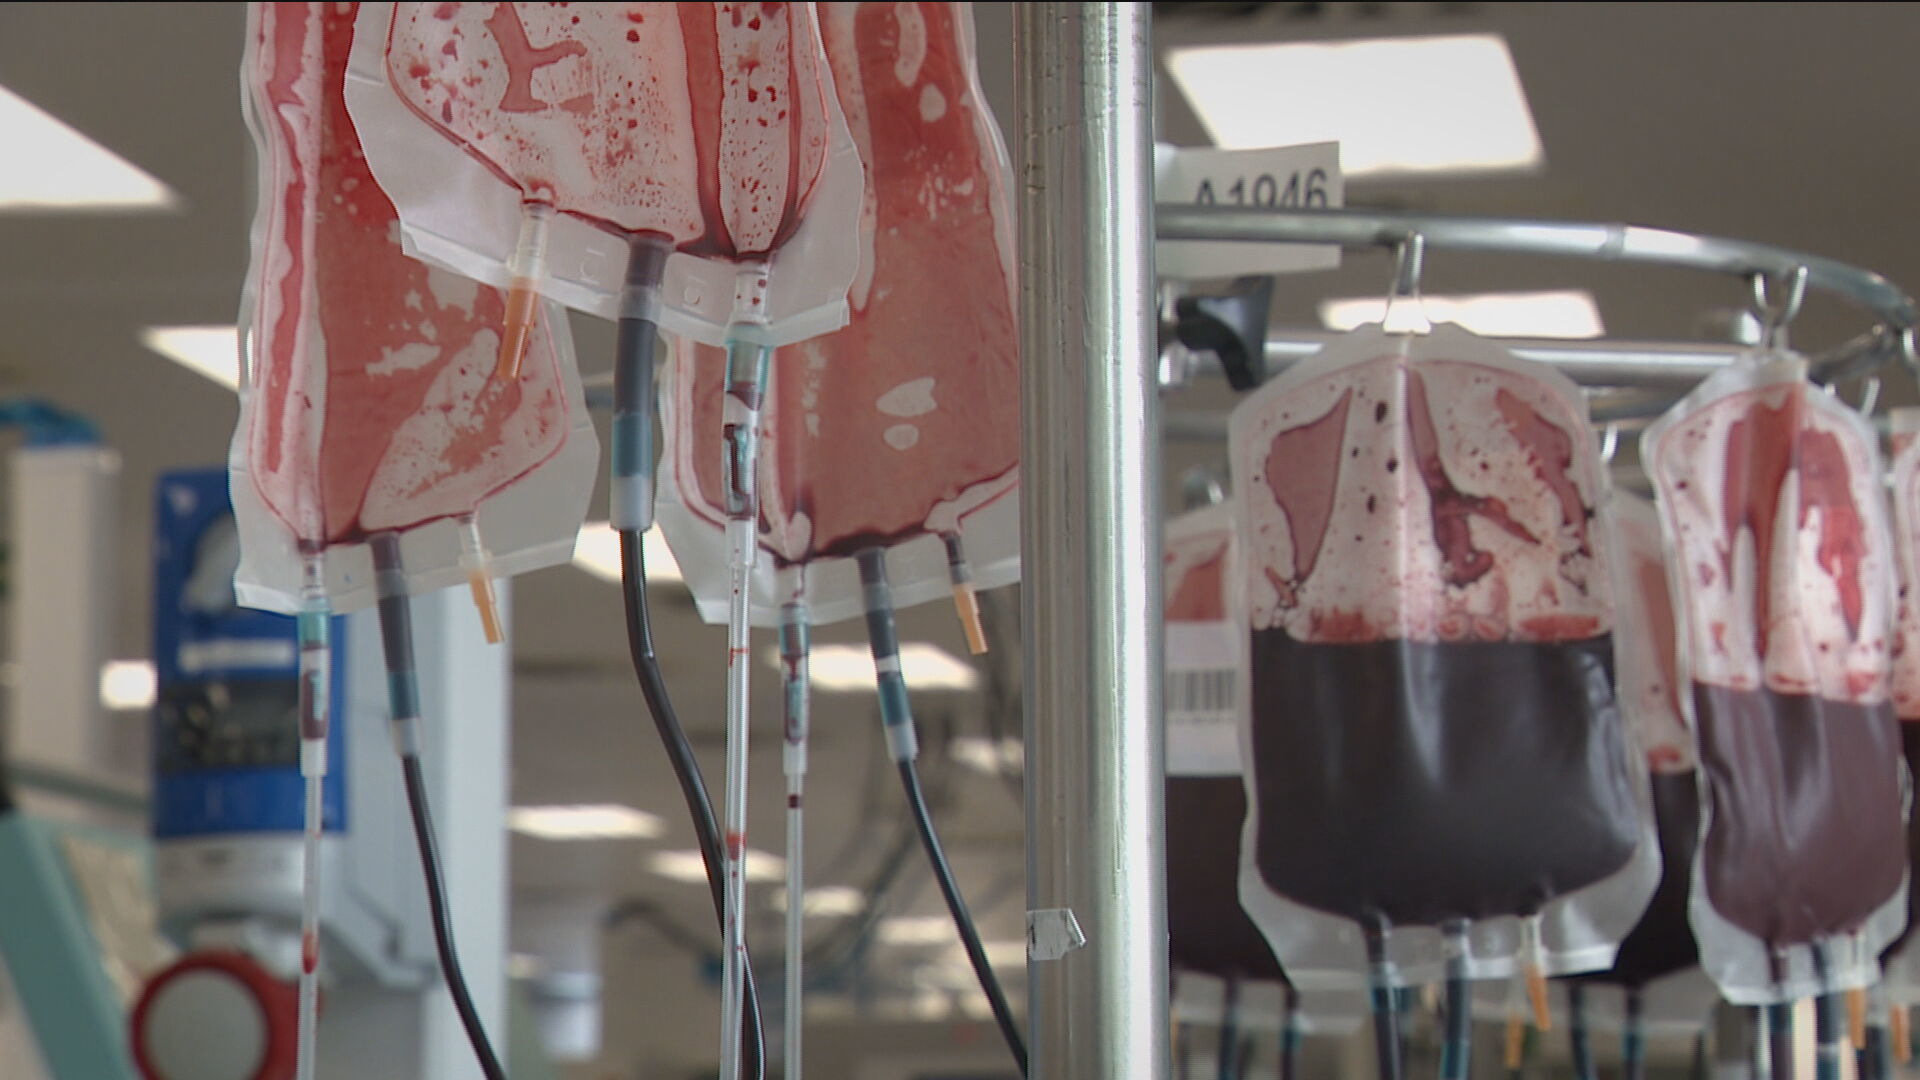 The first full compensation payments to victims of the infected blood scandal will be made before the end of the year, UK ministers have confirmed.